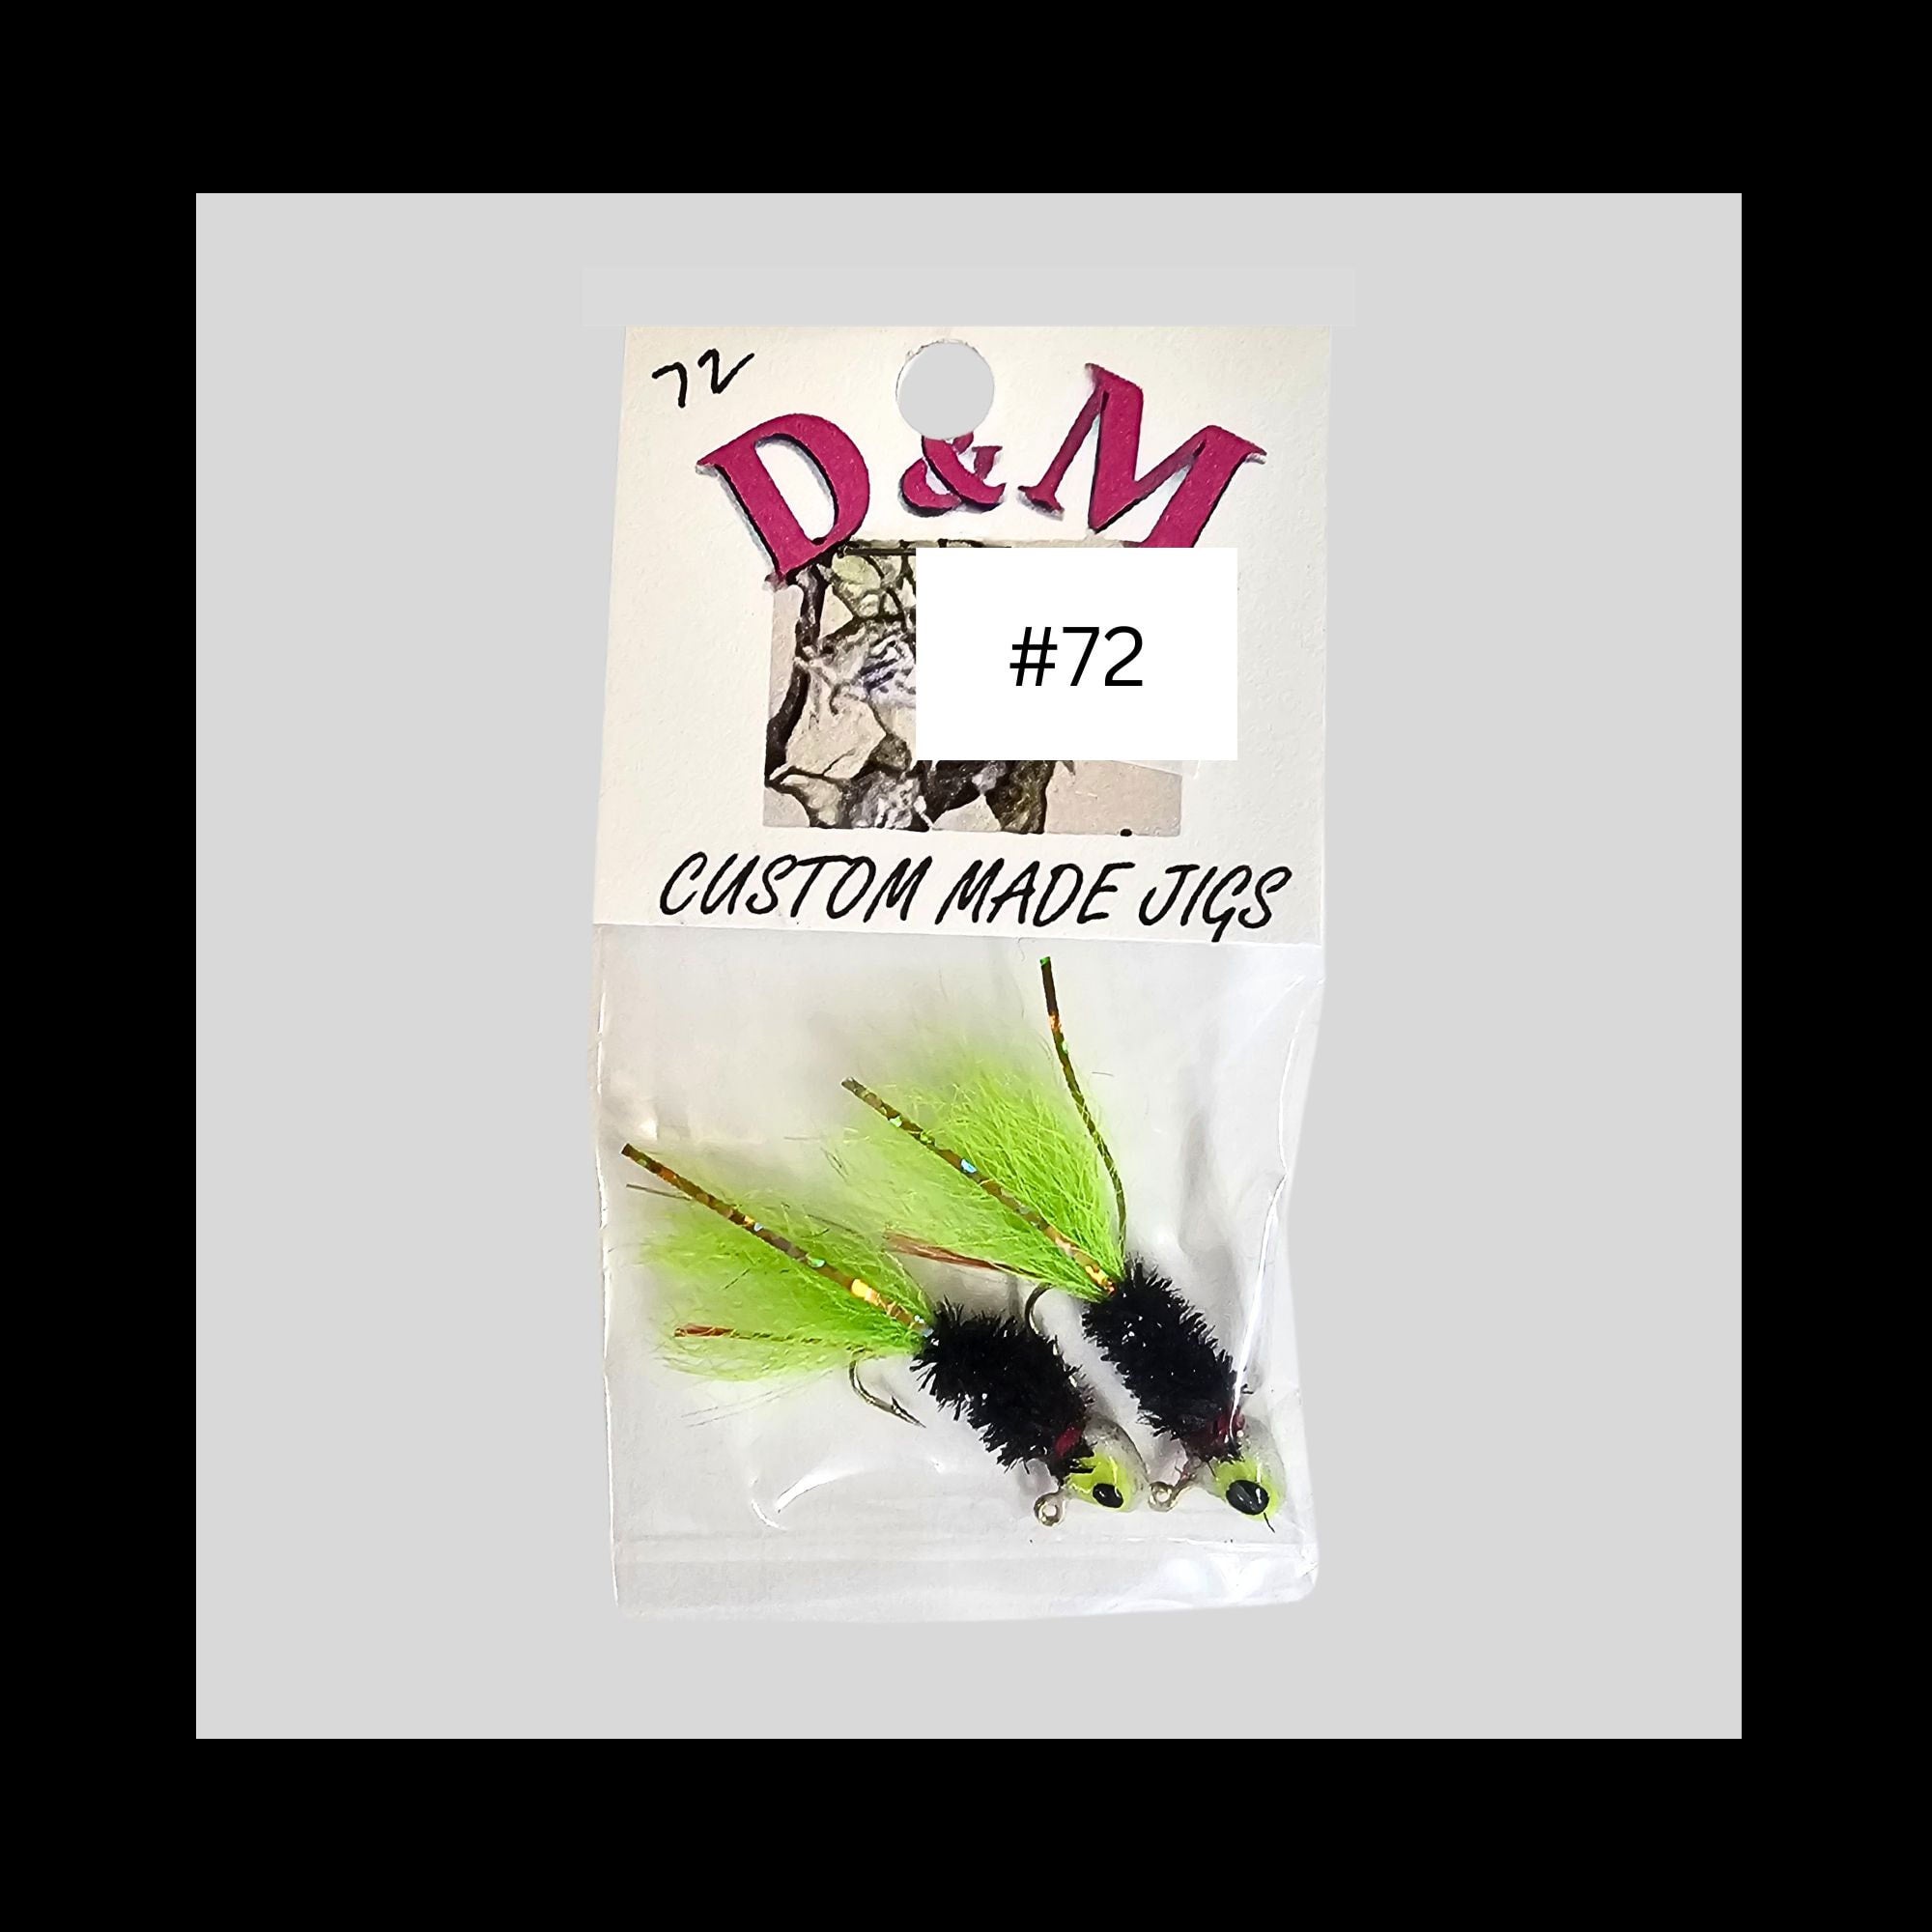 D&M Custom Jigs - I have been hearing about these micro